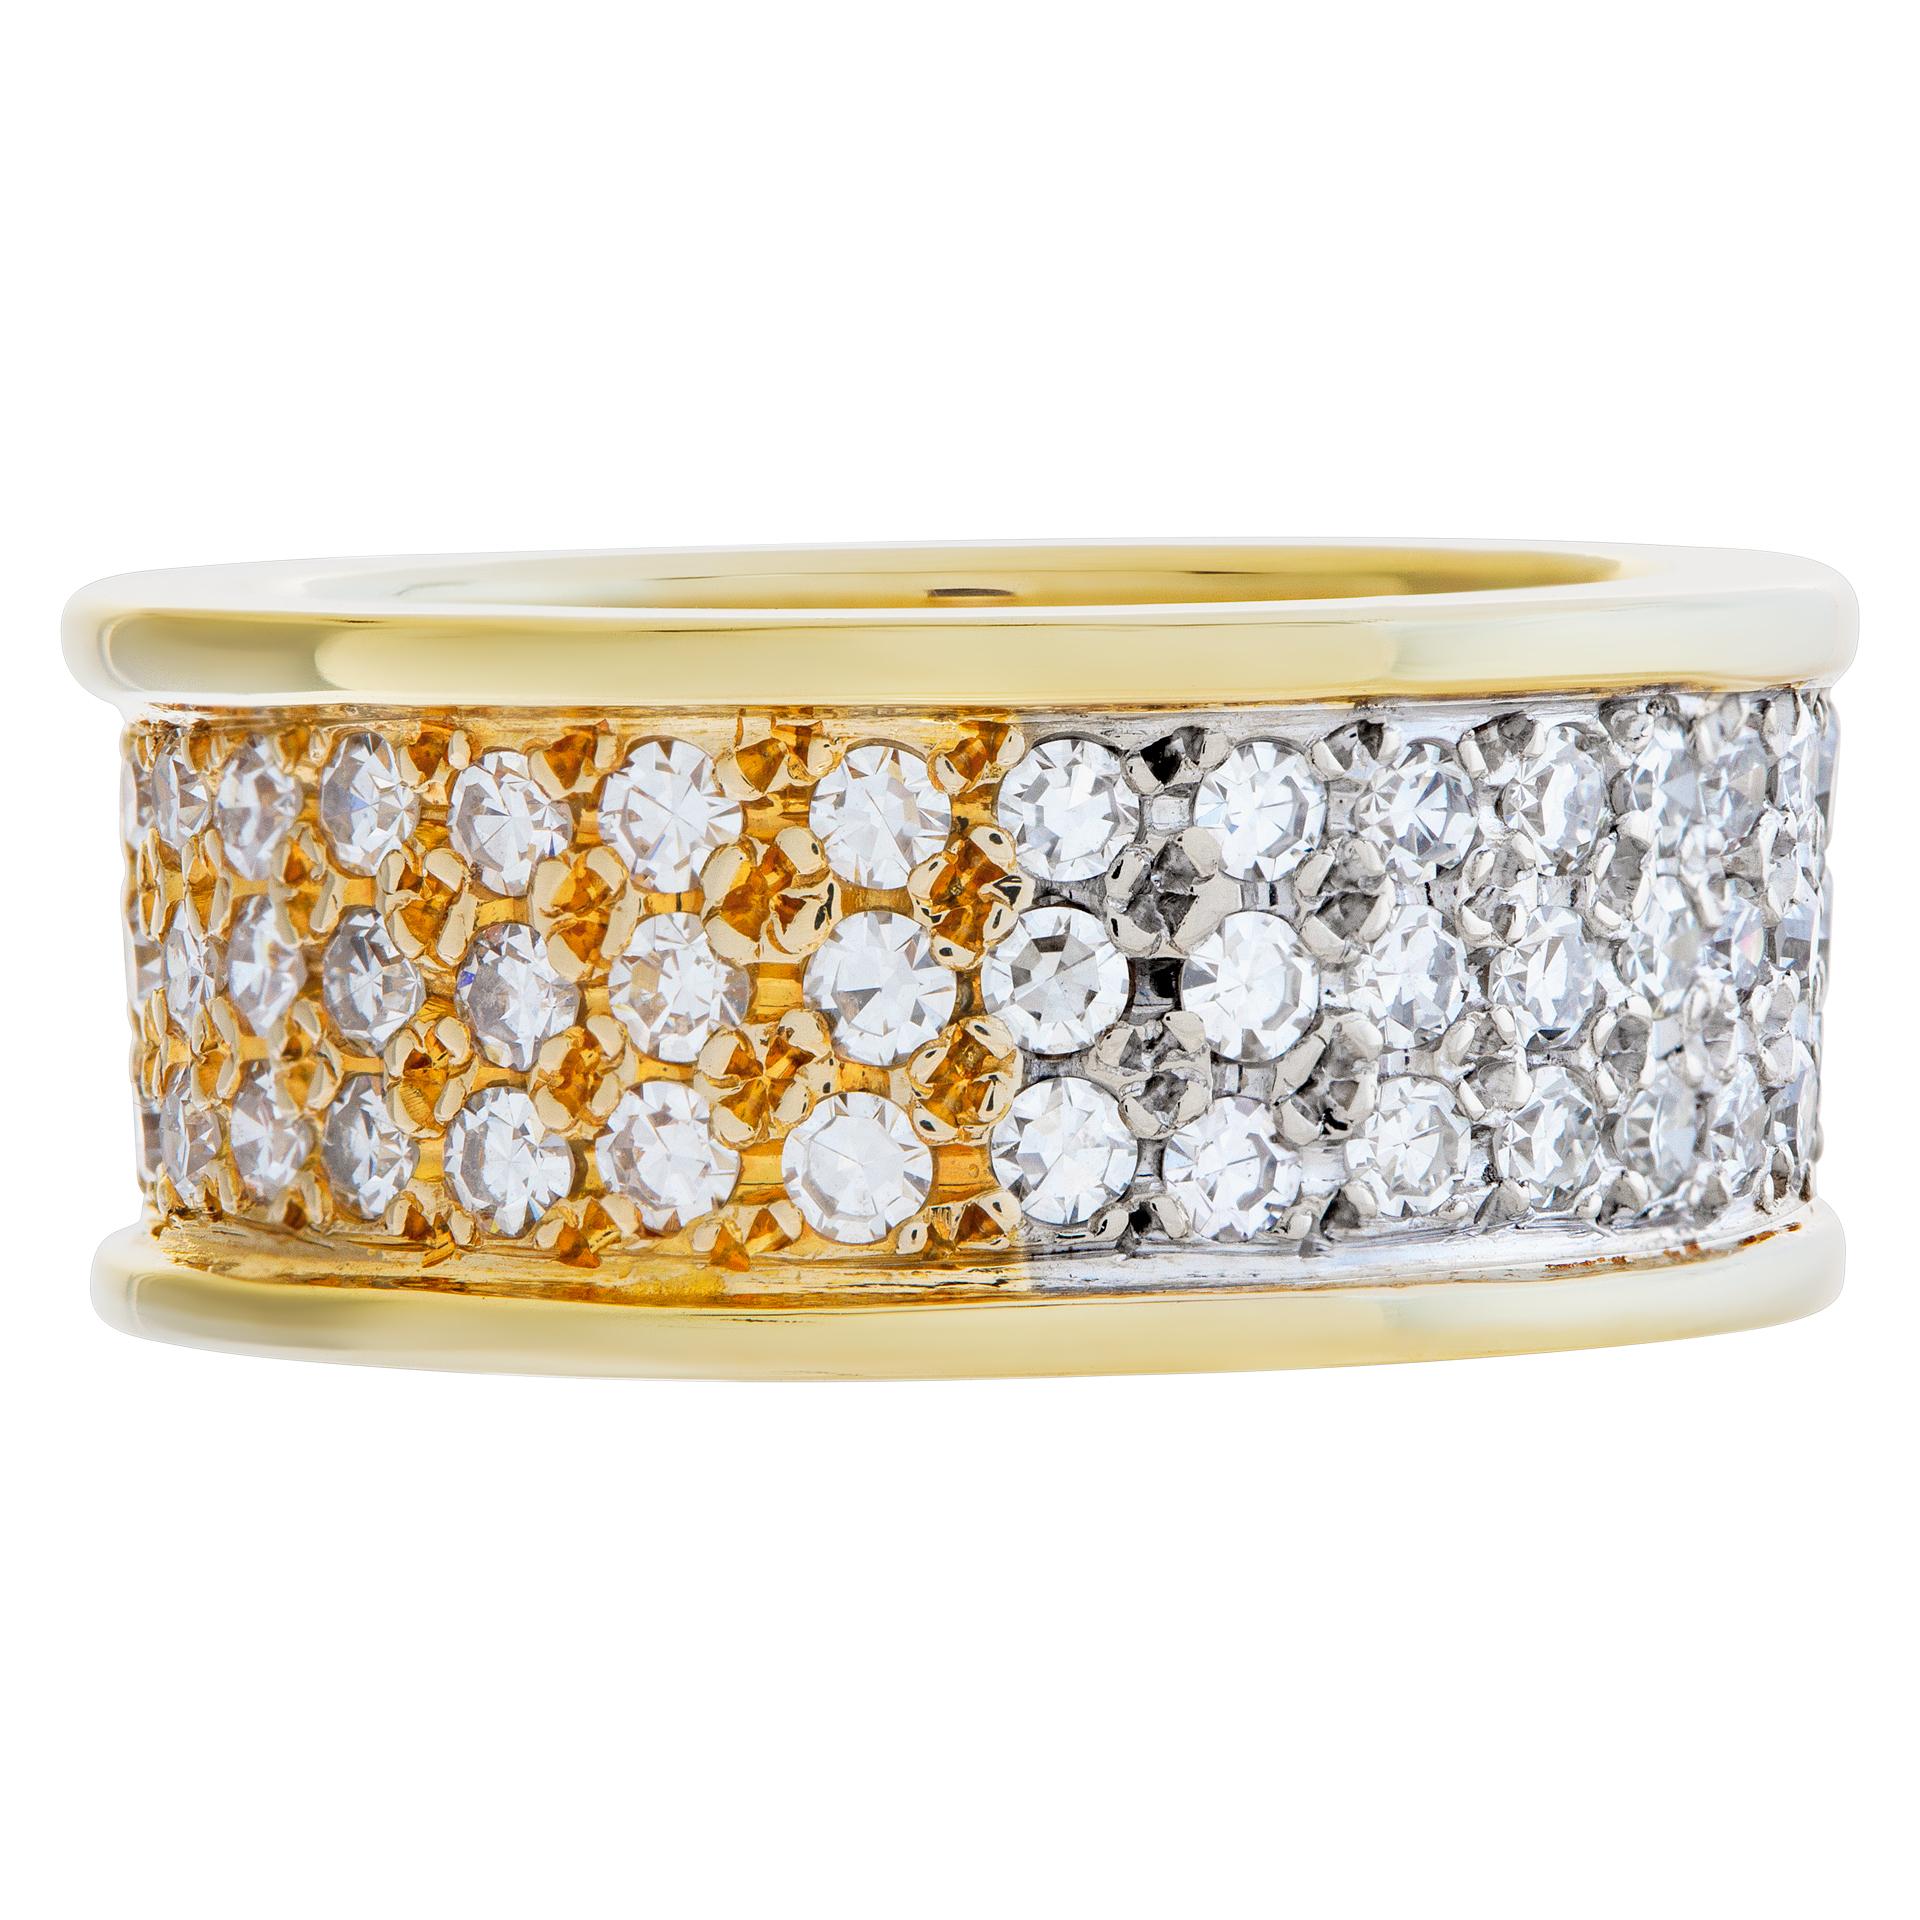 Wide pave diamond eternity band in 18k yellow and white gold with over 2 carats full cut round brilliant diamonds G-H color, VS clarity. Size 5.75. 6mm width.